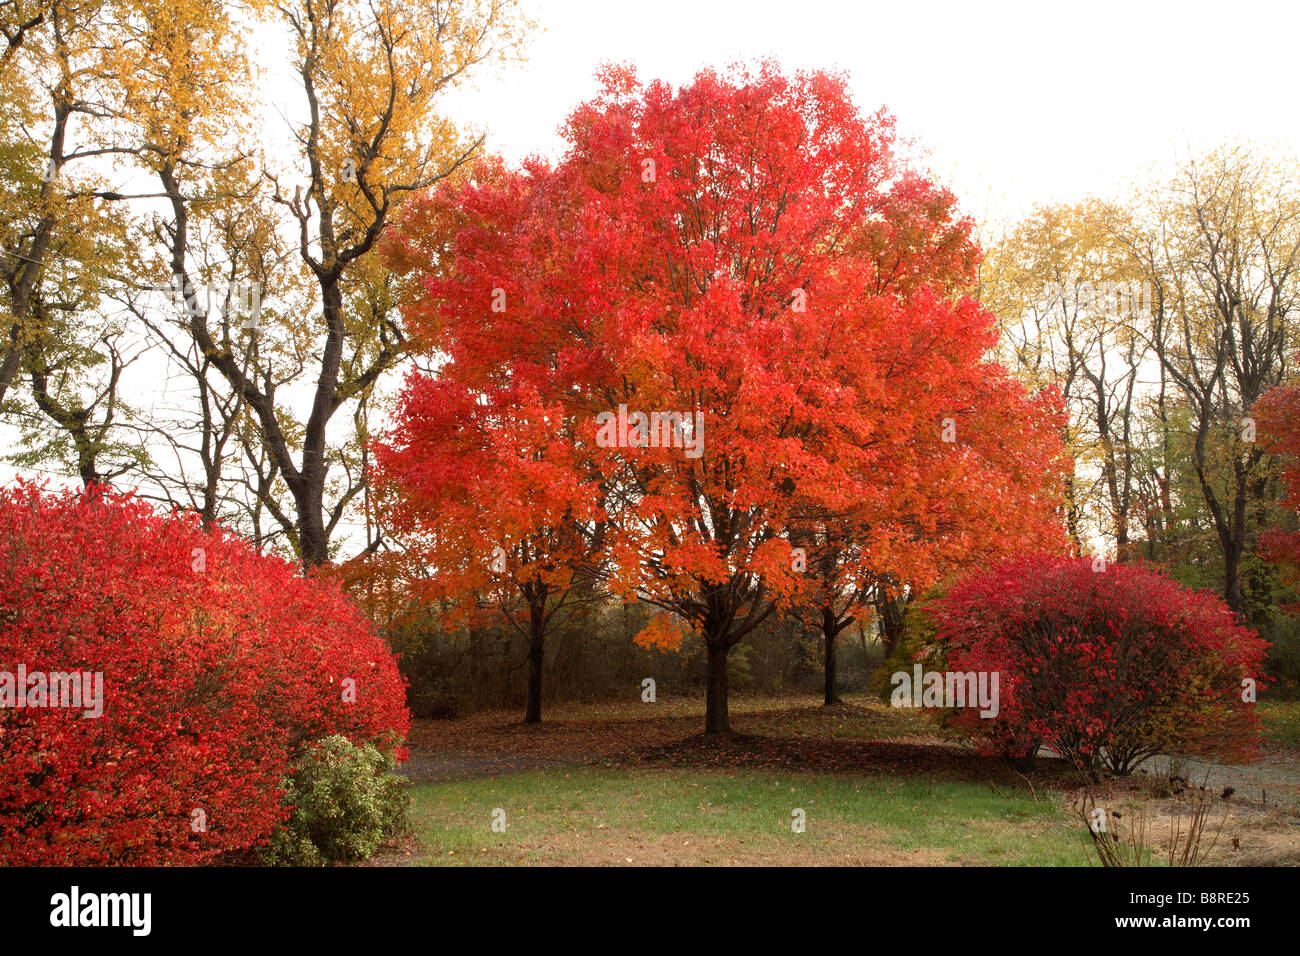 Red maple tree in full scarlet color. Stock Photo